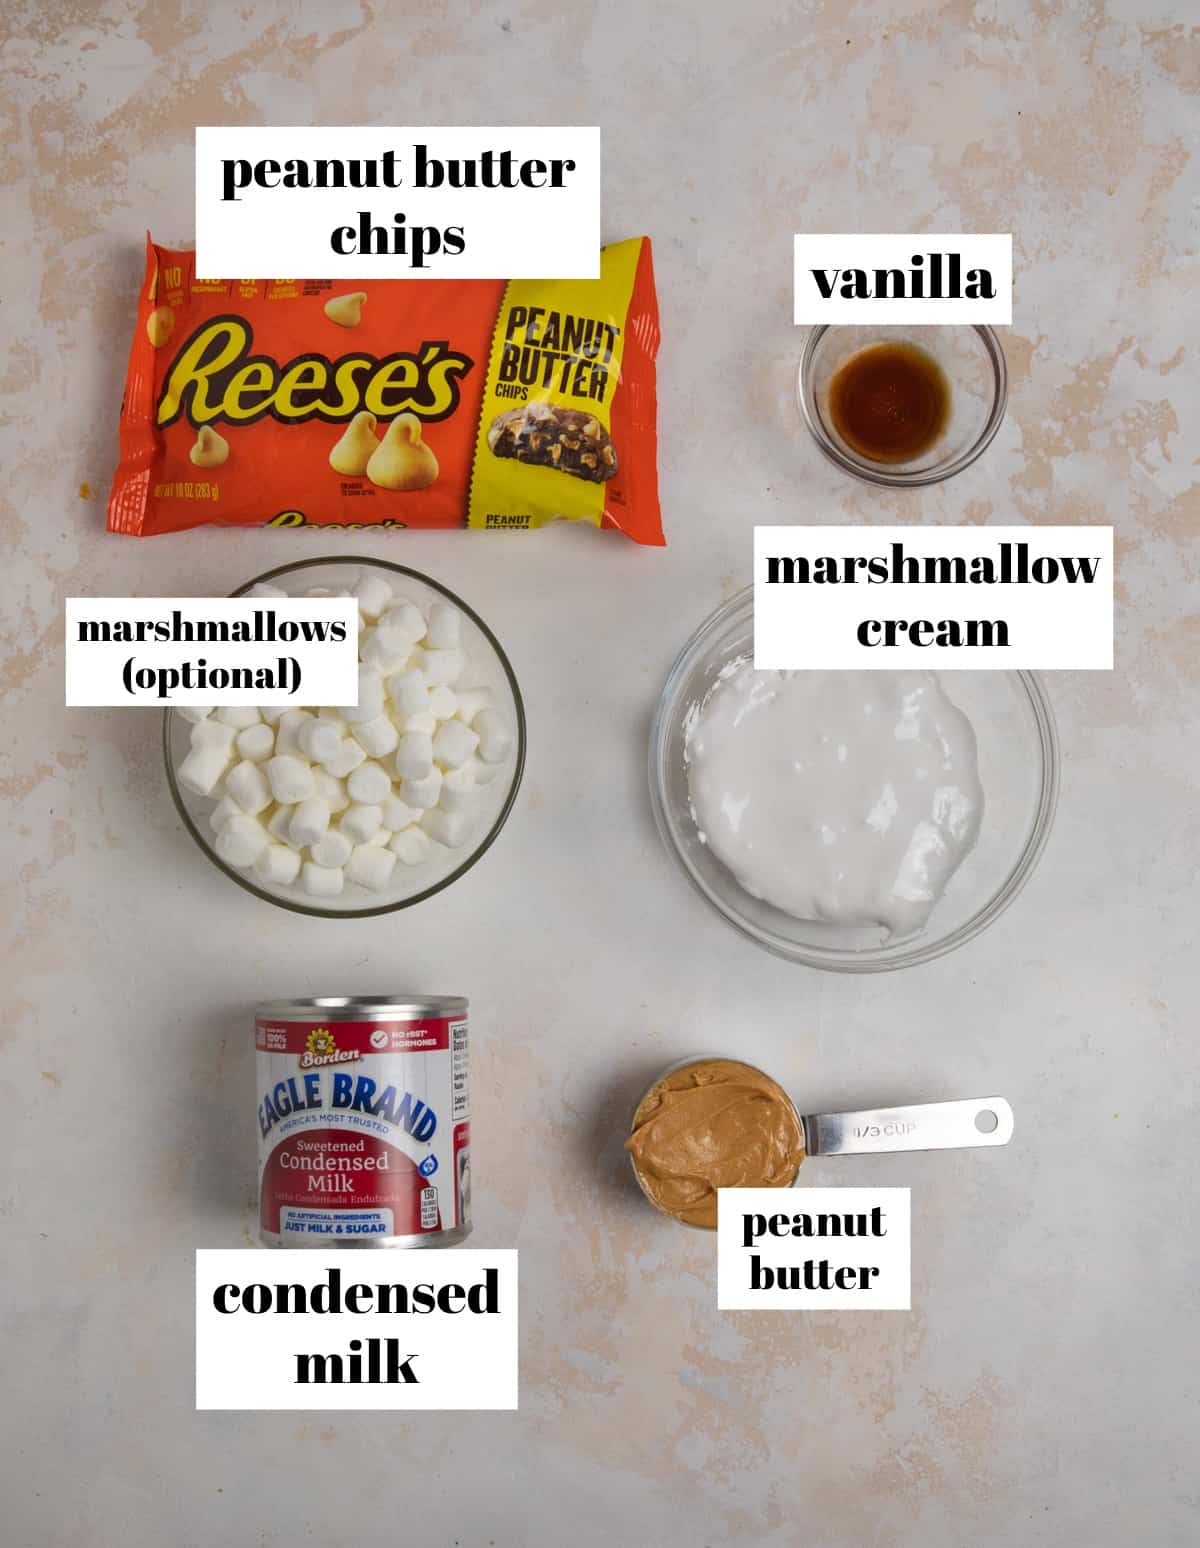 Condensed milk, peanut butter chips, vanilla and other fudge ingredients labeled on counter.